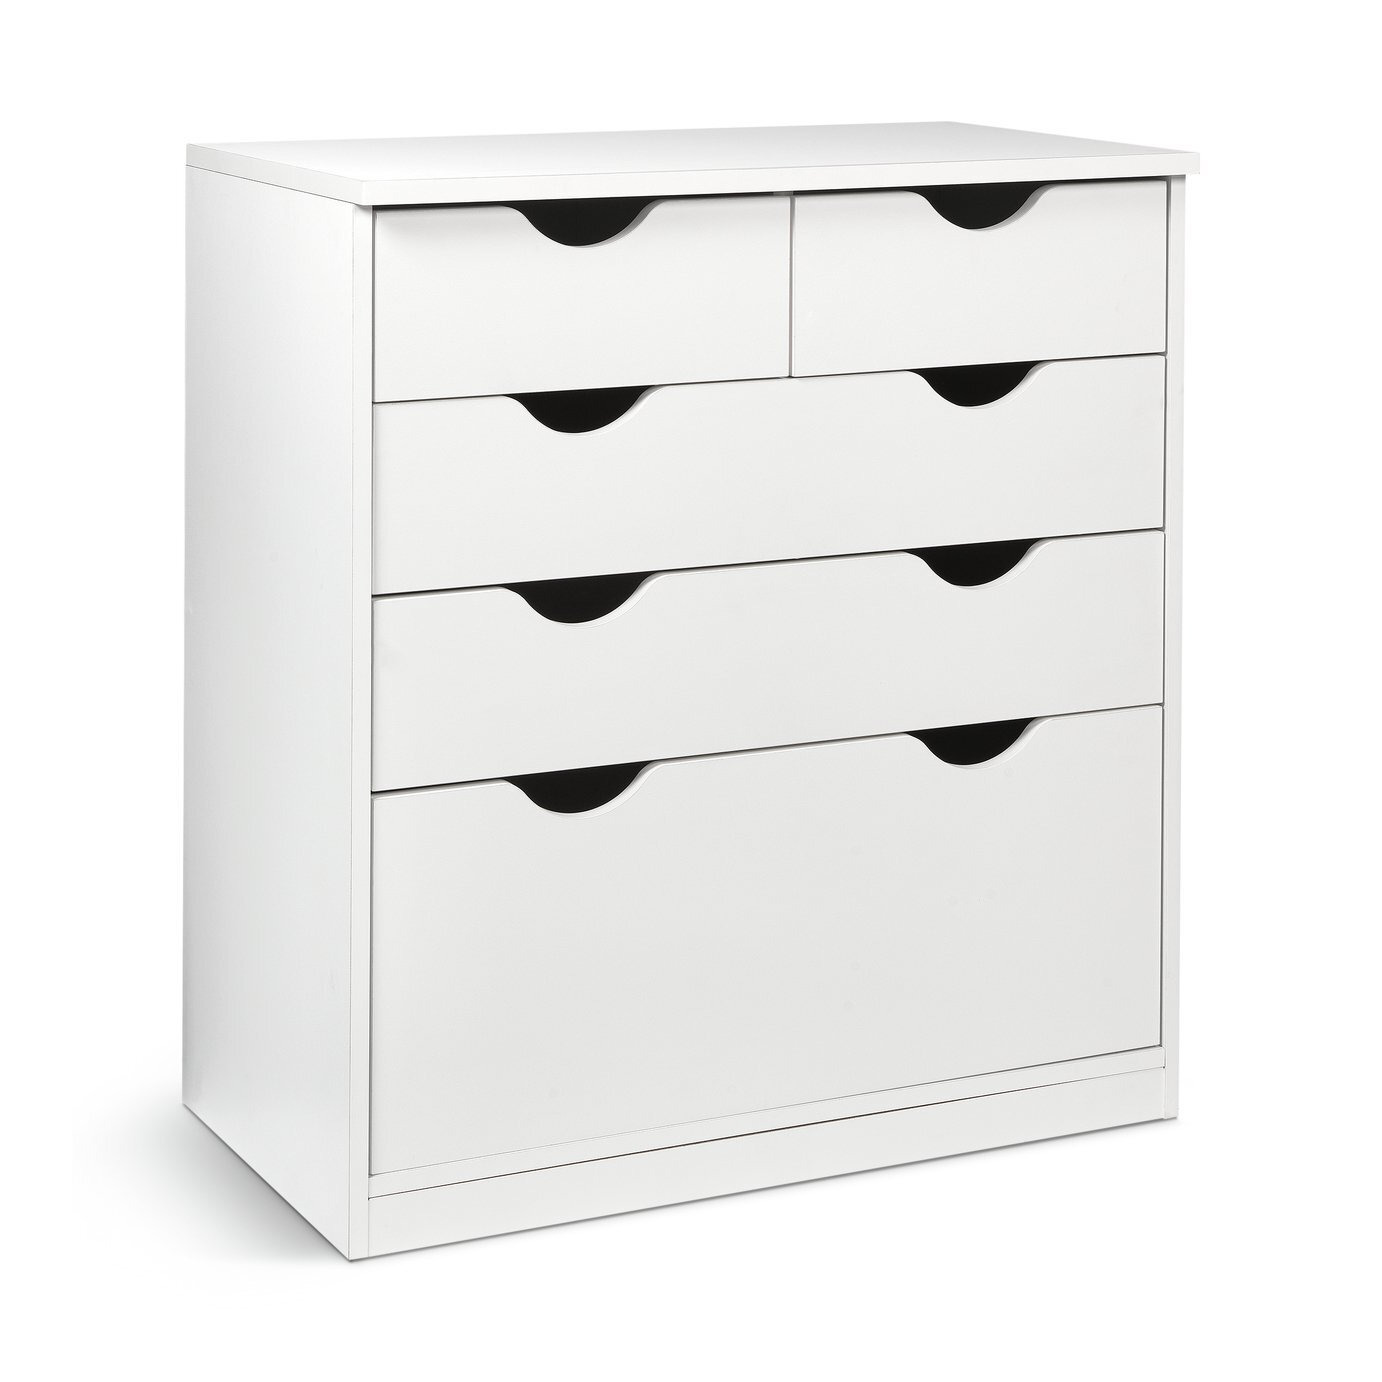 Habitat Kids Pagnell 3+2 Chest of Drawers - White - image 1